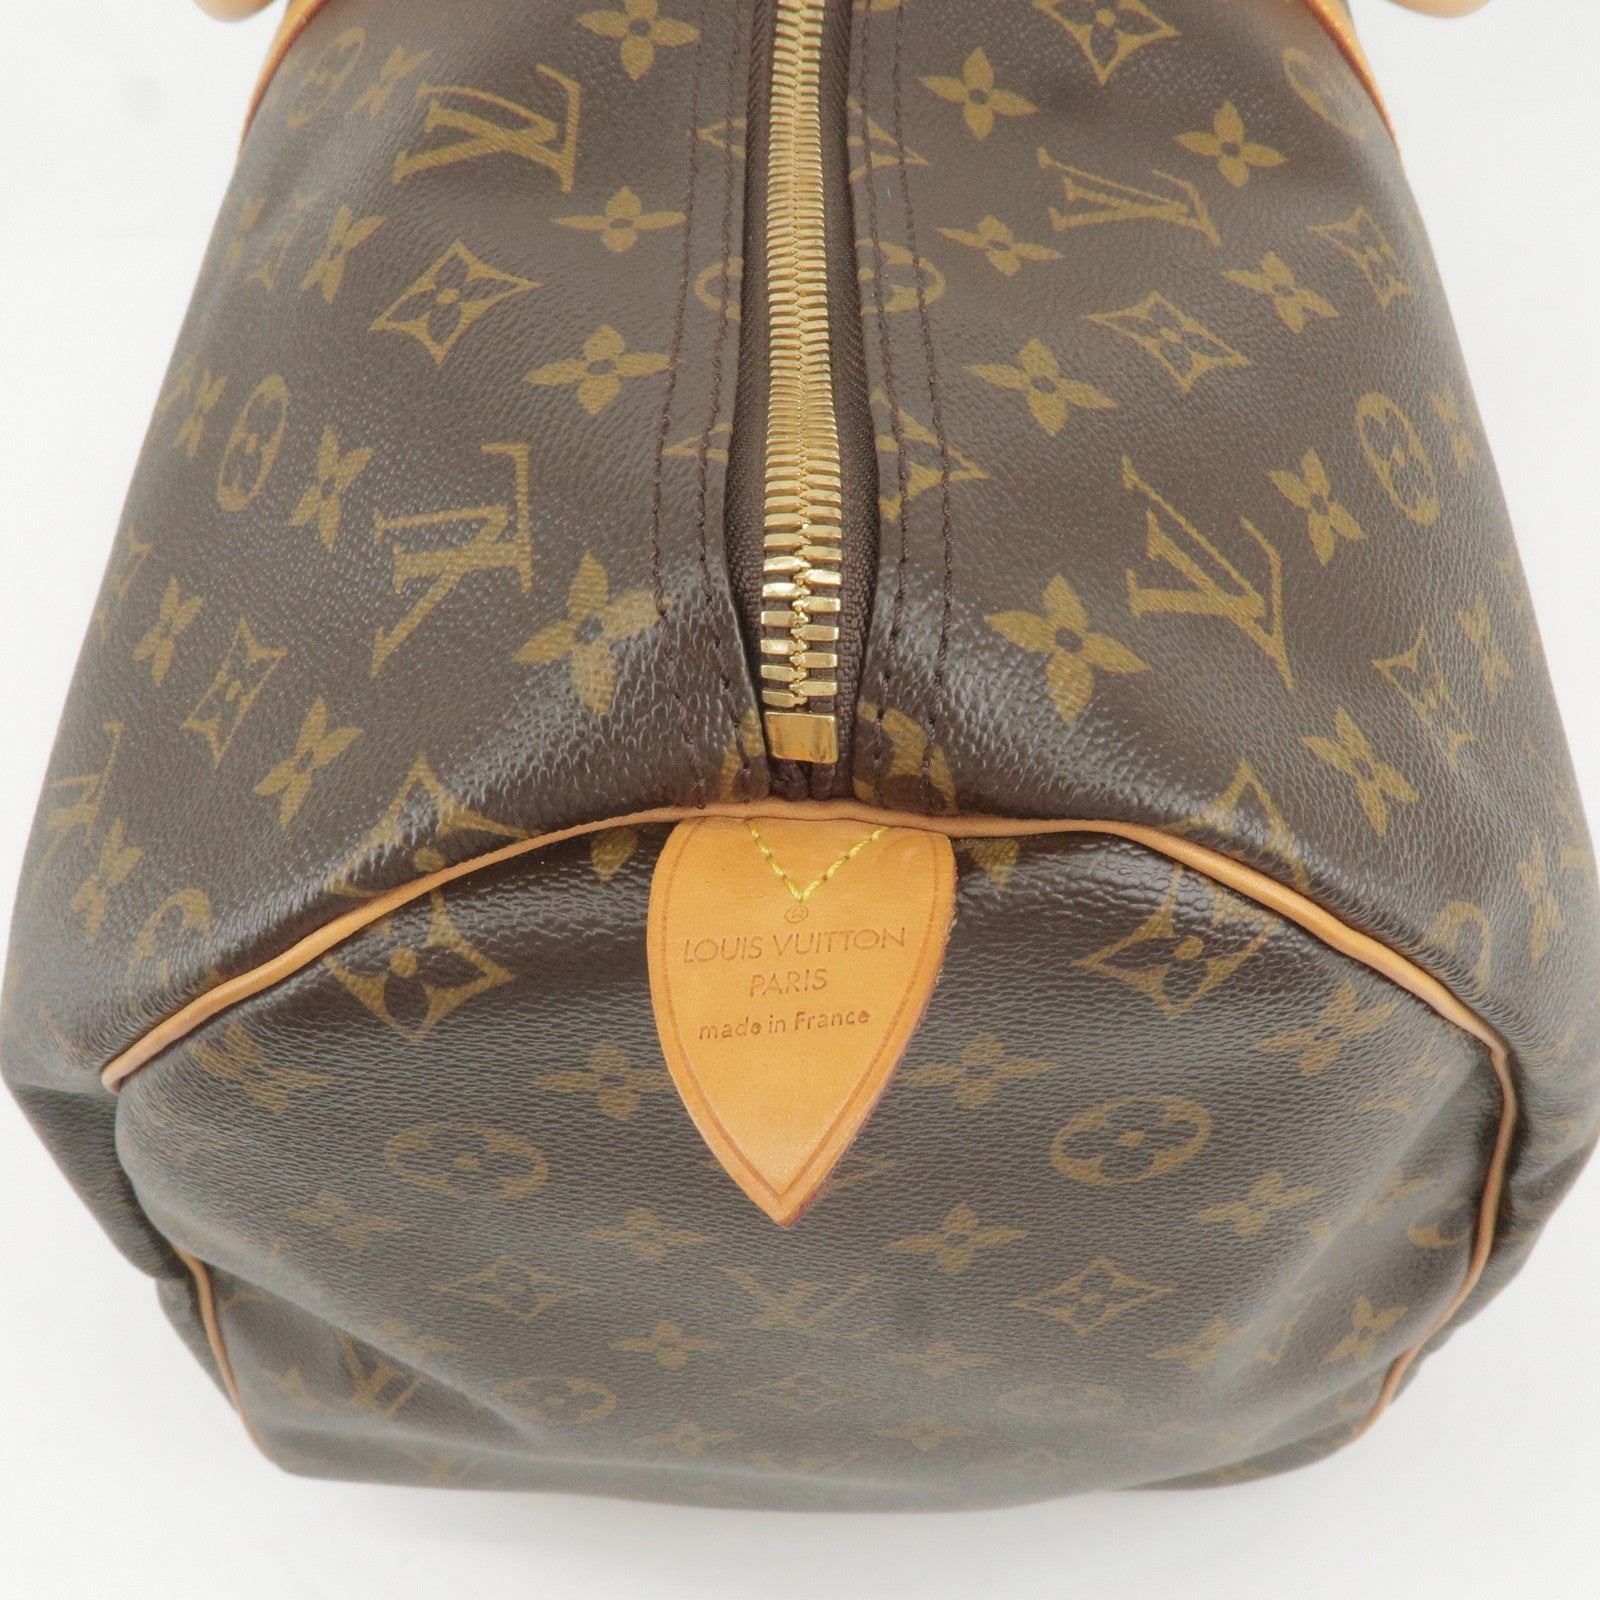 Buy Pre-owned & Brand new Luxury Louis Vuitton Empreinte Leather